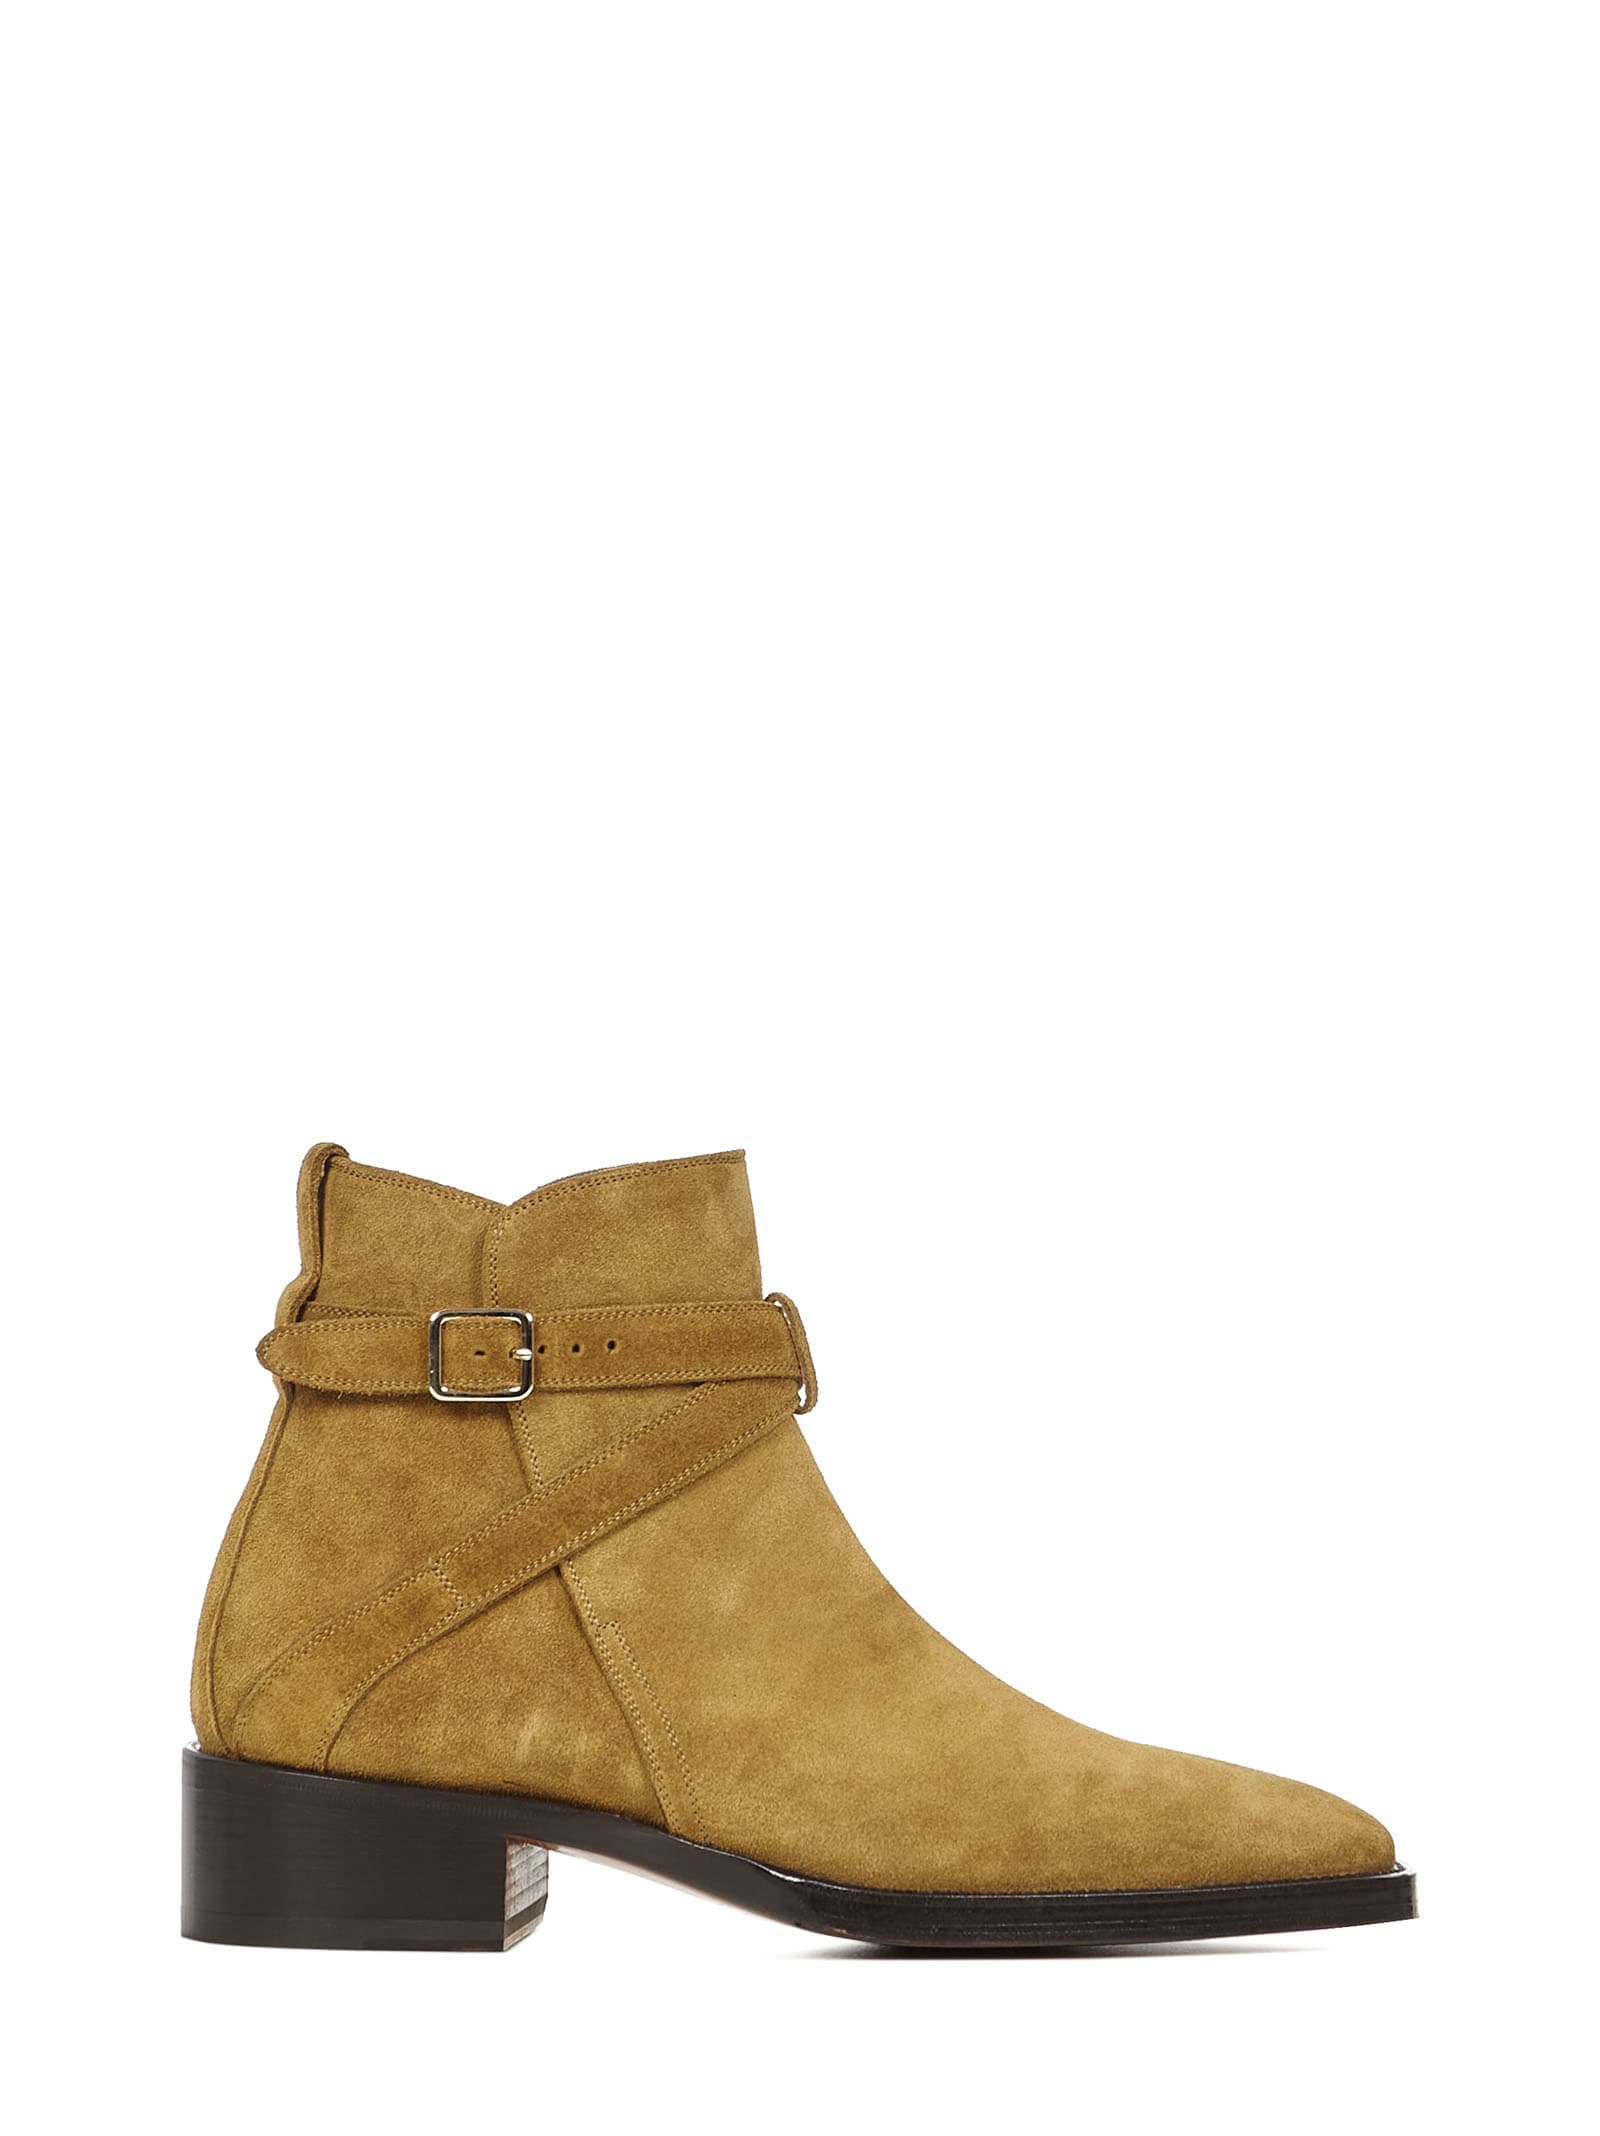 Tom Ford Roadchester Boots